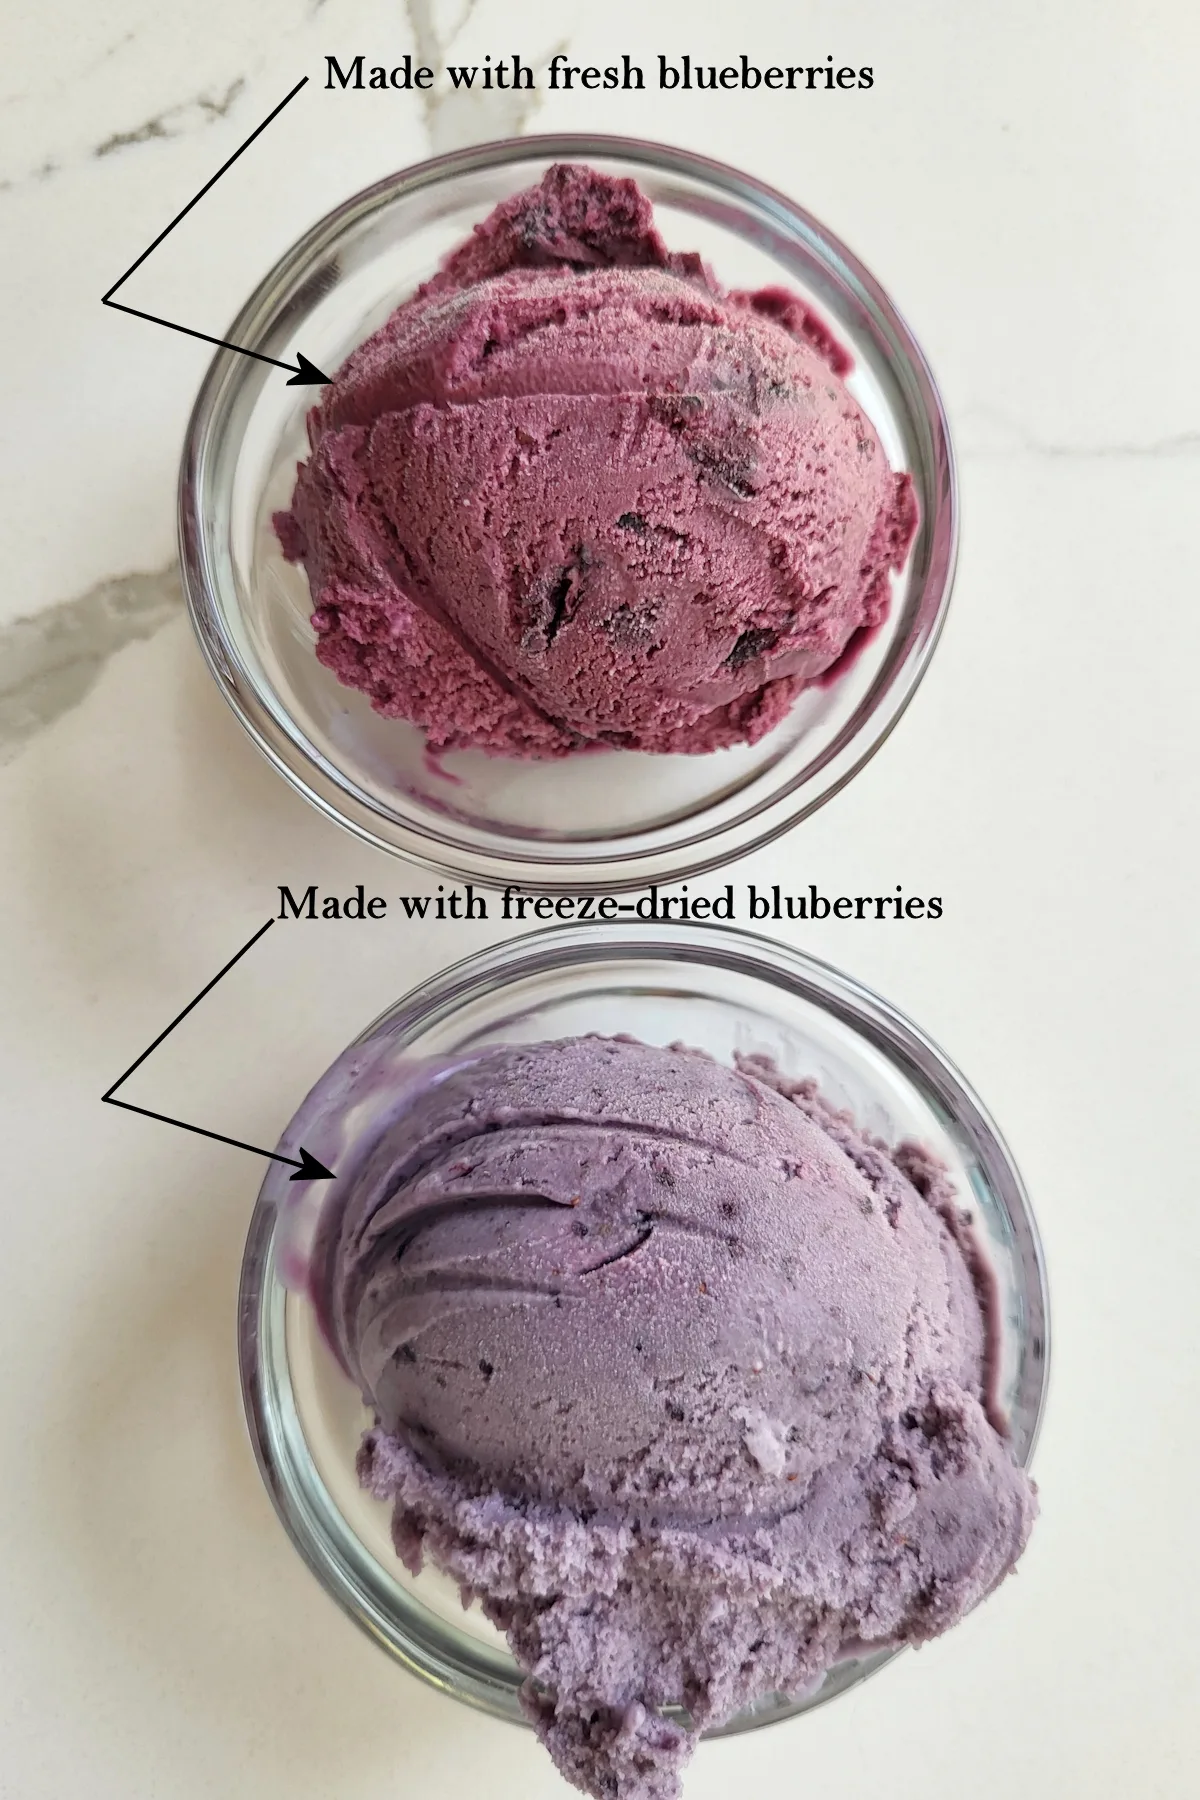 two bowls of blueberry ice cream with text overlay "made with fresh blueberries" and "made with freeze dried blueberries".